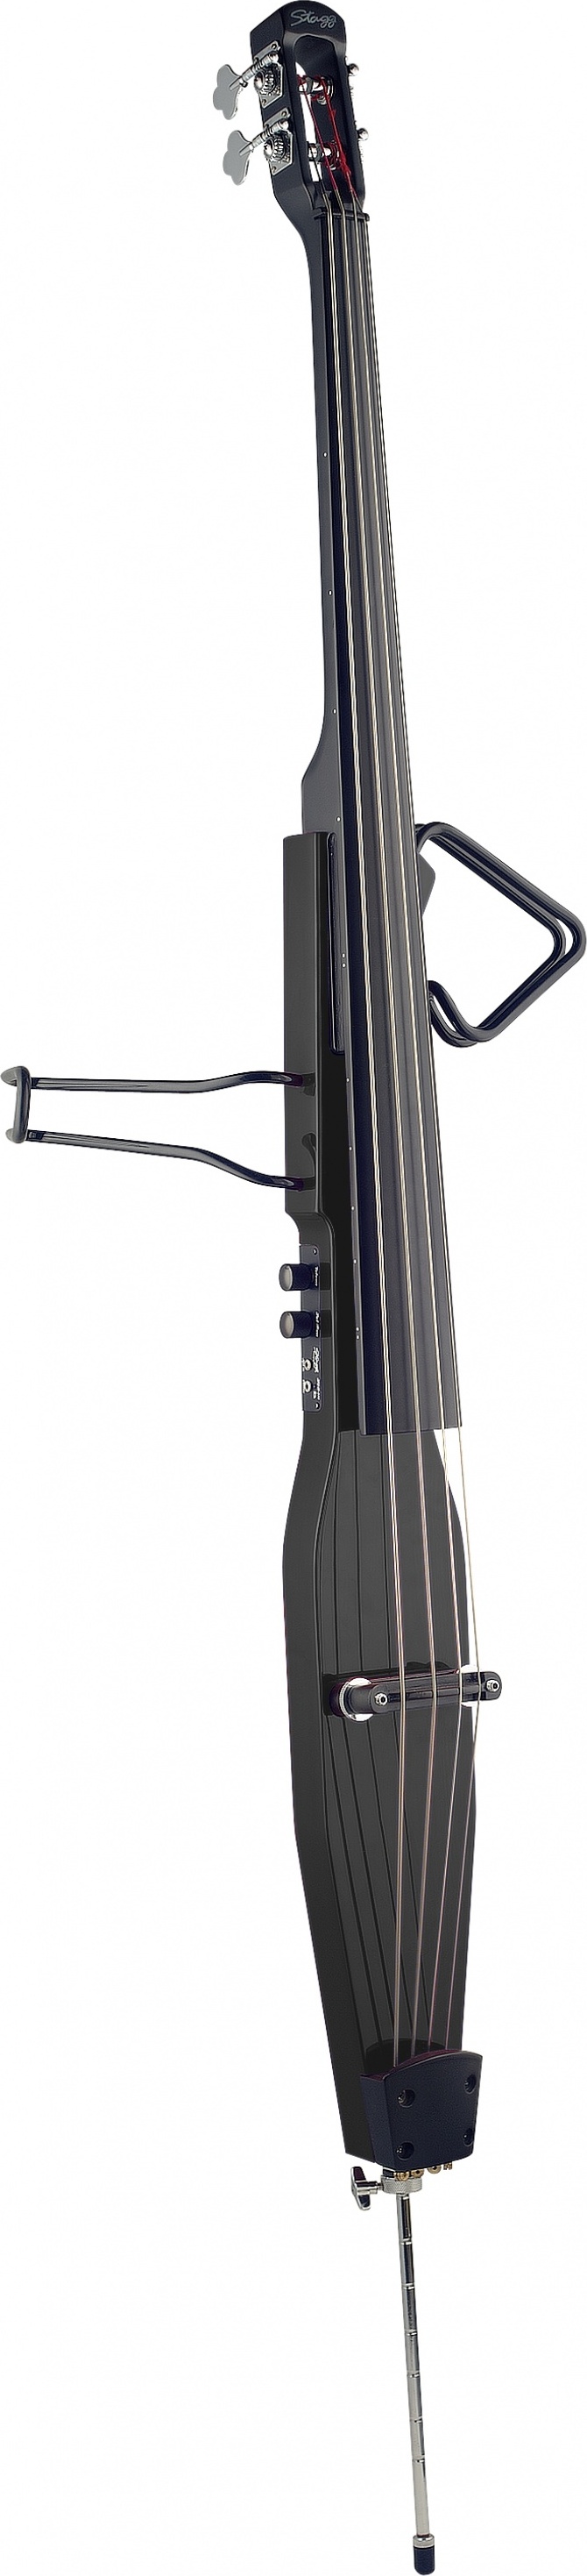 Stagg Edb-3/4 Mbk - Electric double bass - Main picture